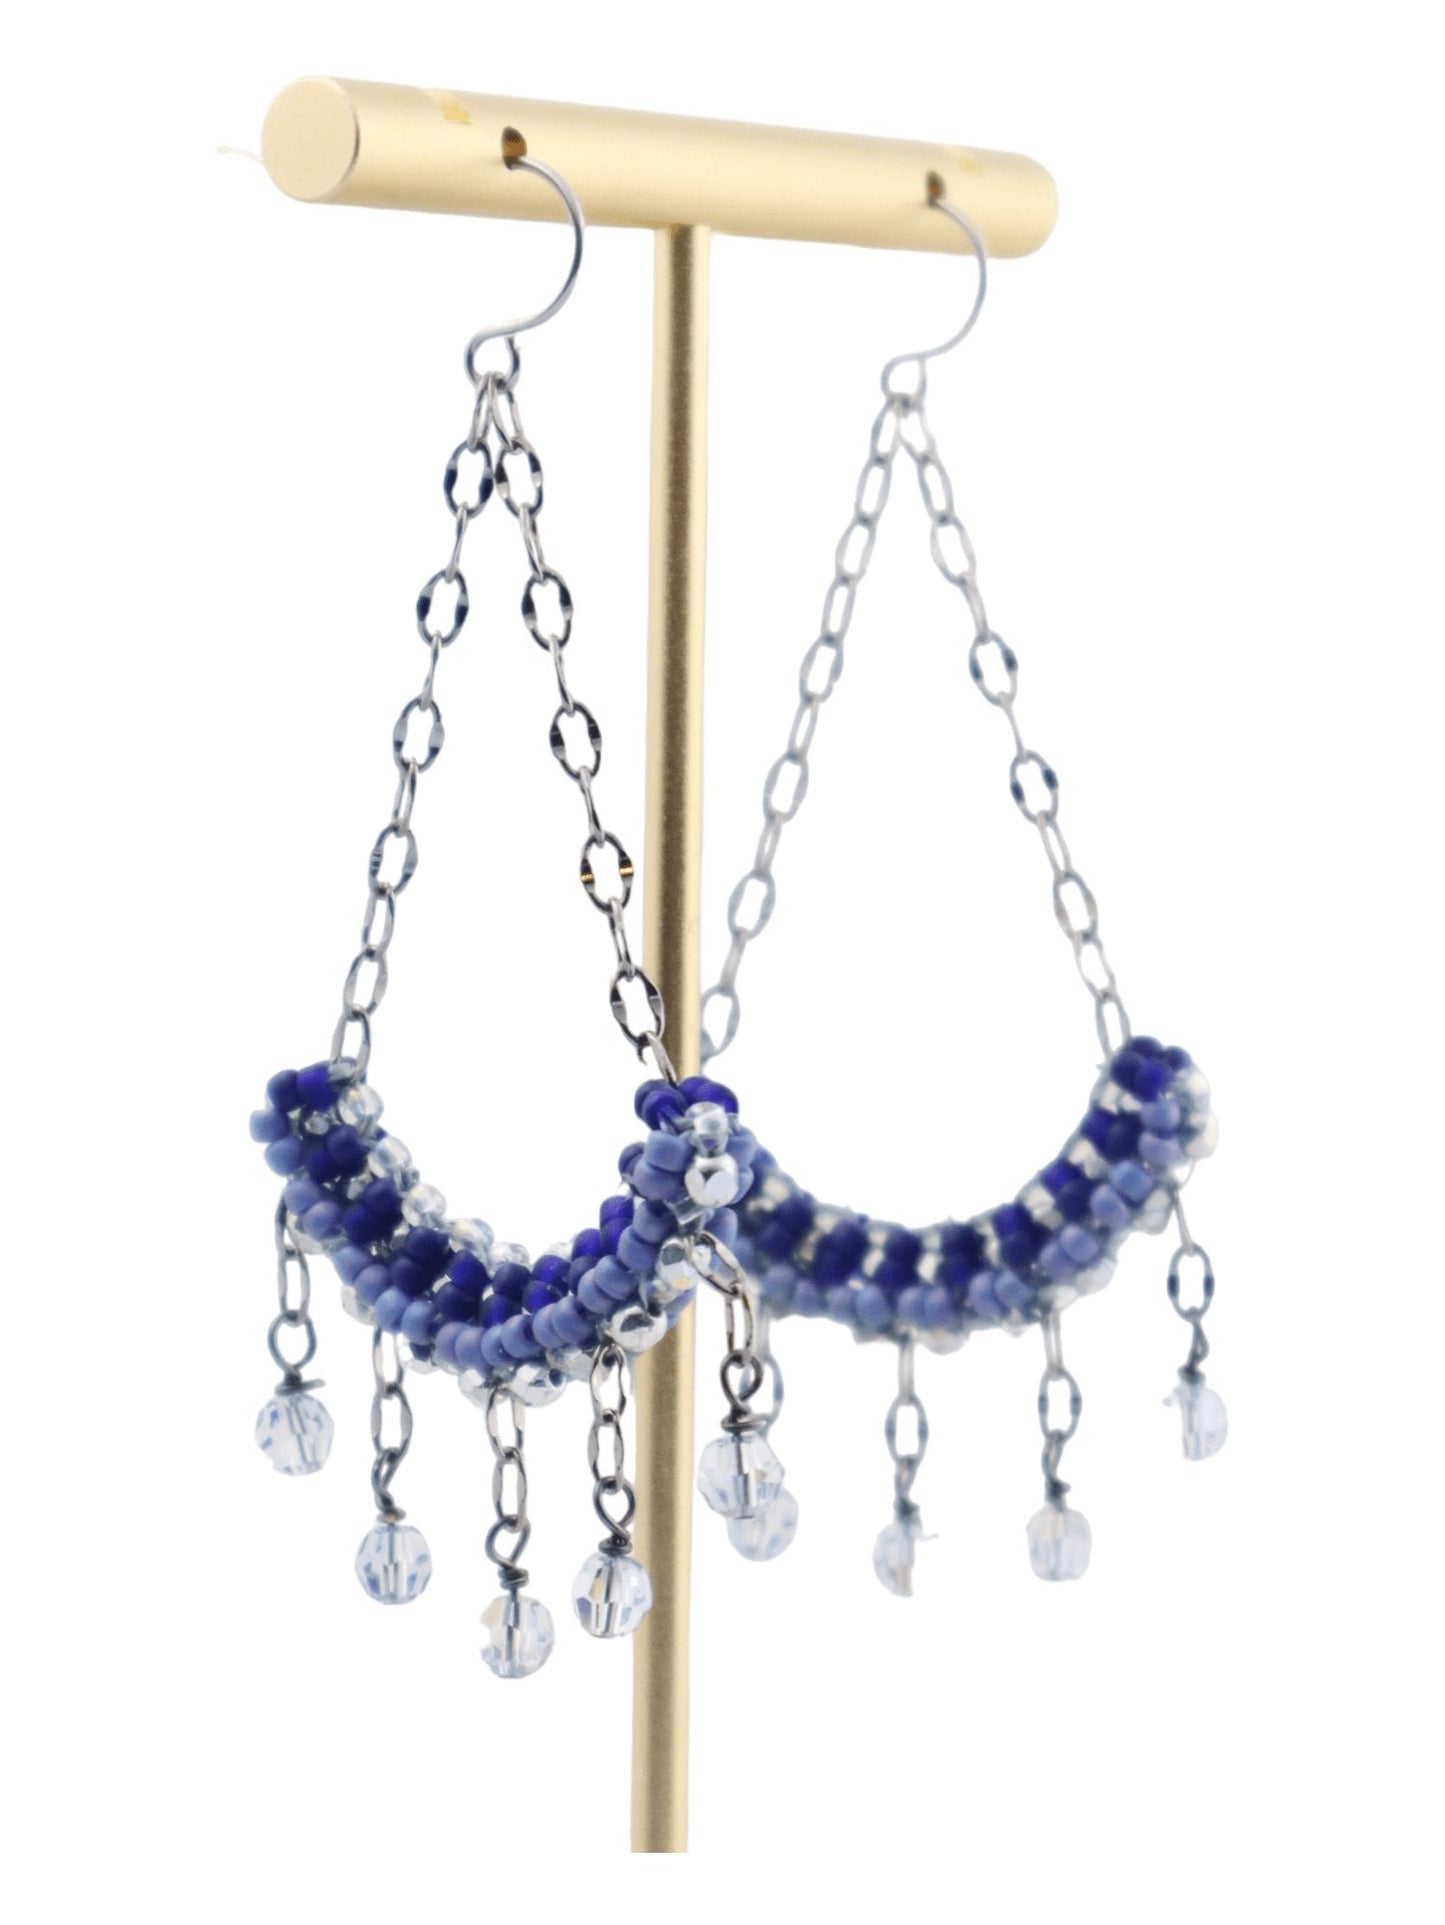 Radiant-Chandelier-Earrings---Perfect-For-Any-Wedding---Kaleidoscopes-And-Polka-Dots